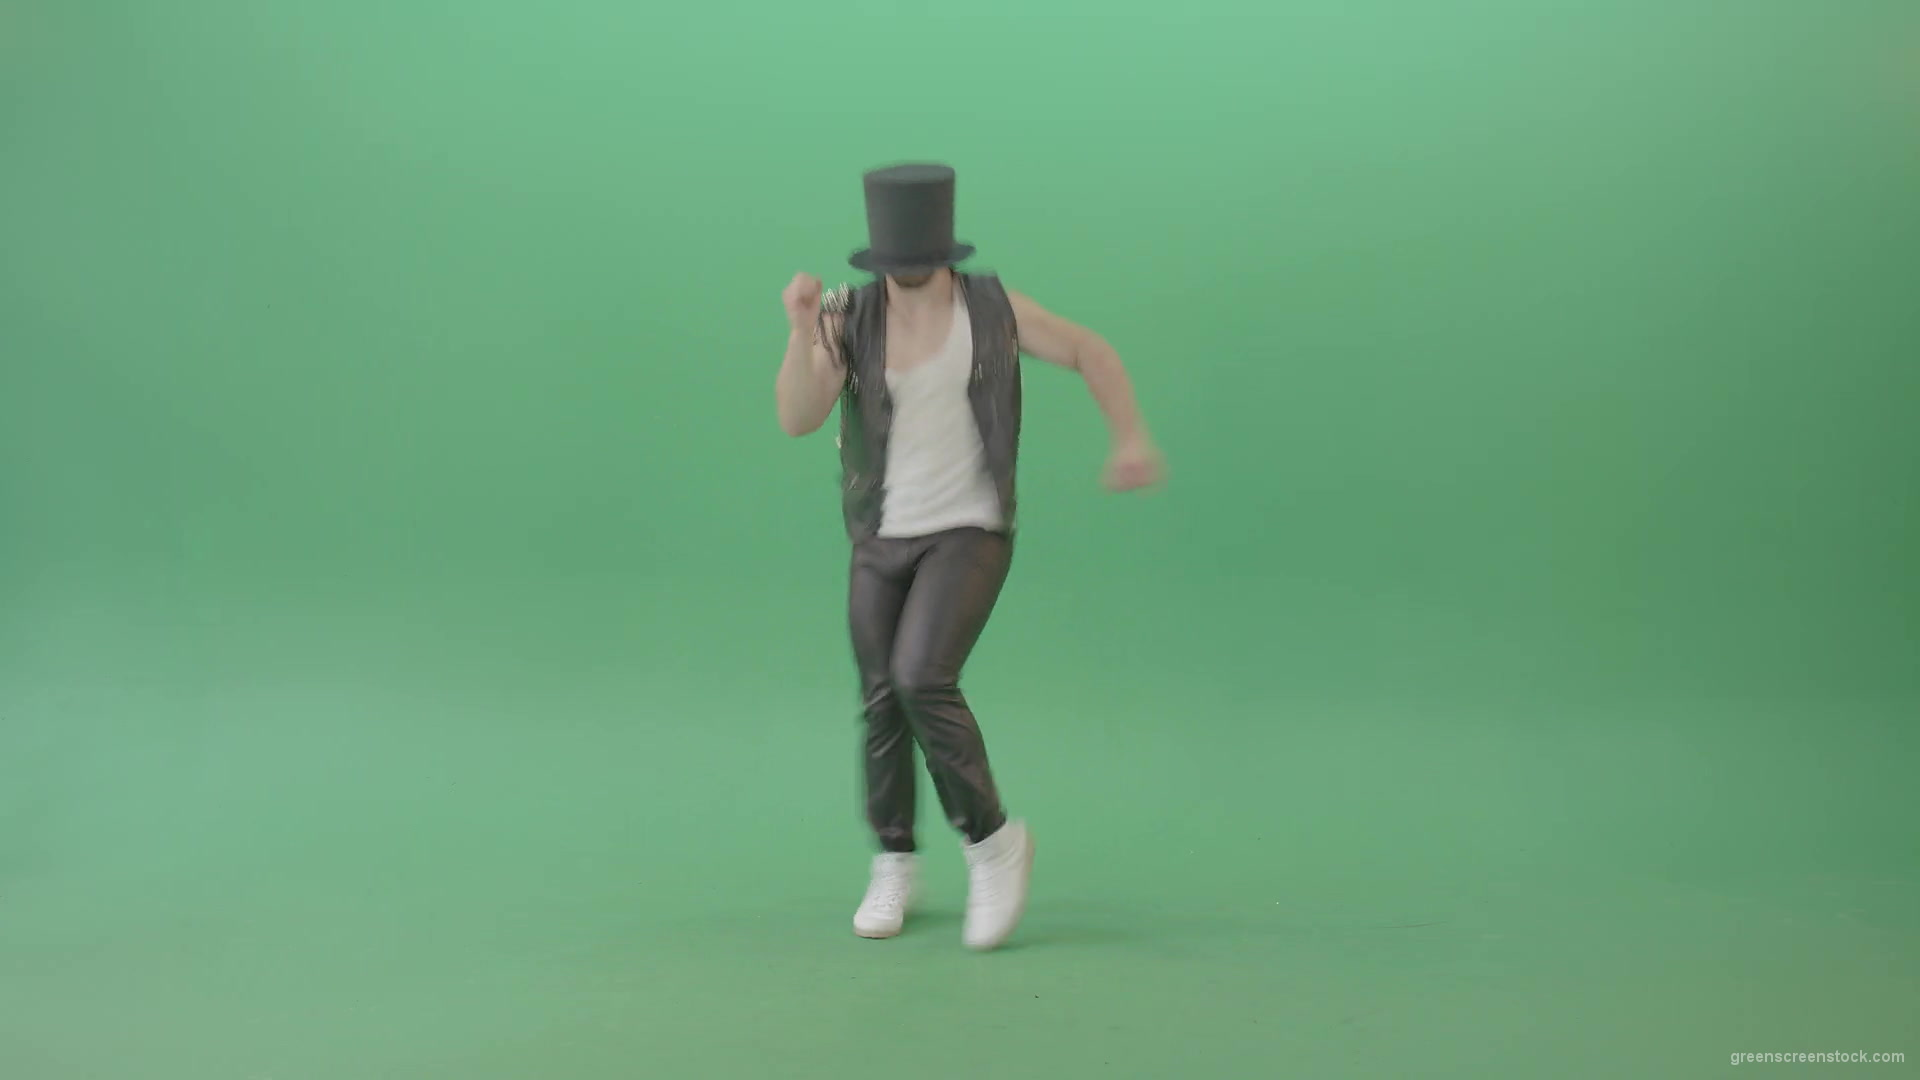 Funny-Man-in-Cylinder-Hat-and-black-fetish-costume-dancing-and-jumping-over-Green-Screen-4K-Video-Footage-1920_006 Green Screen Stock